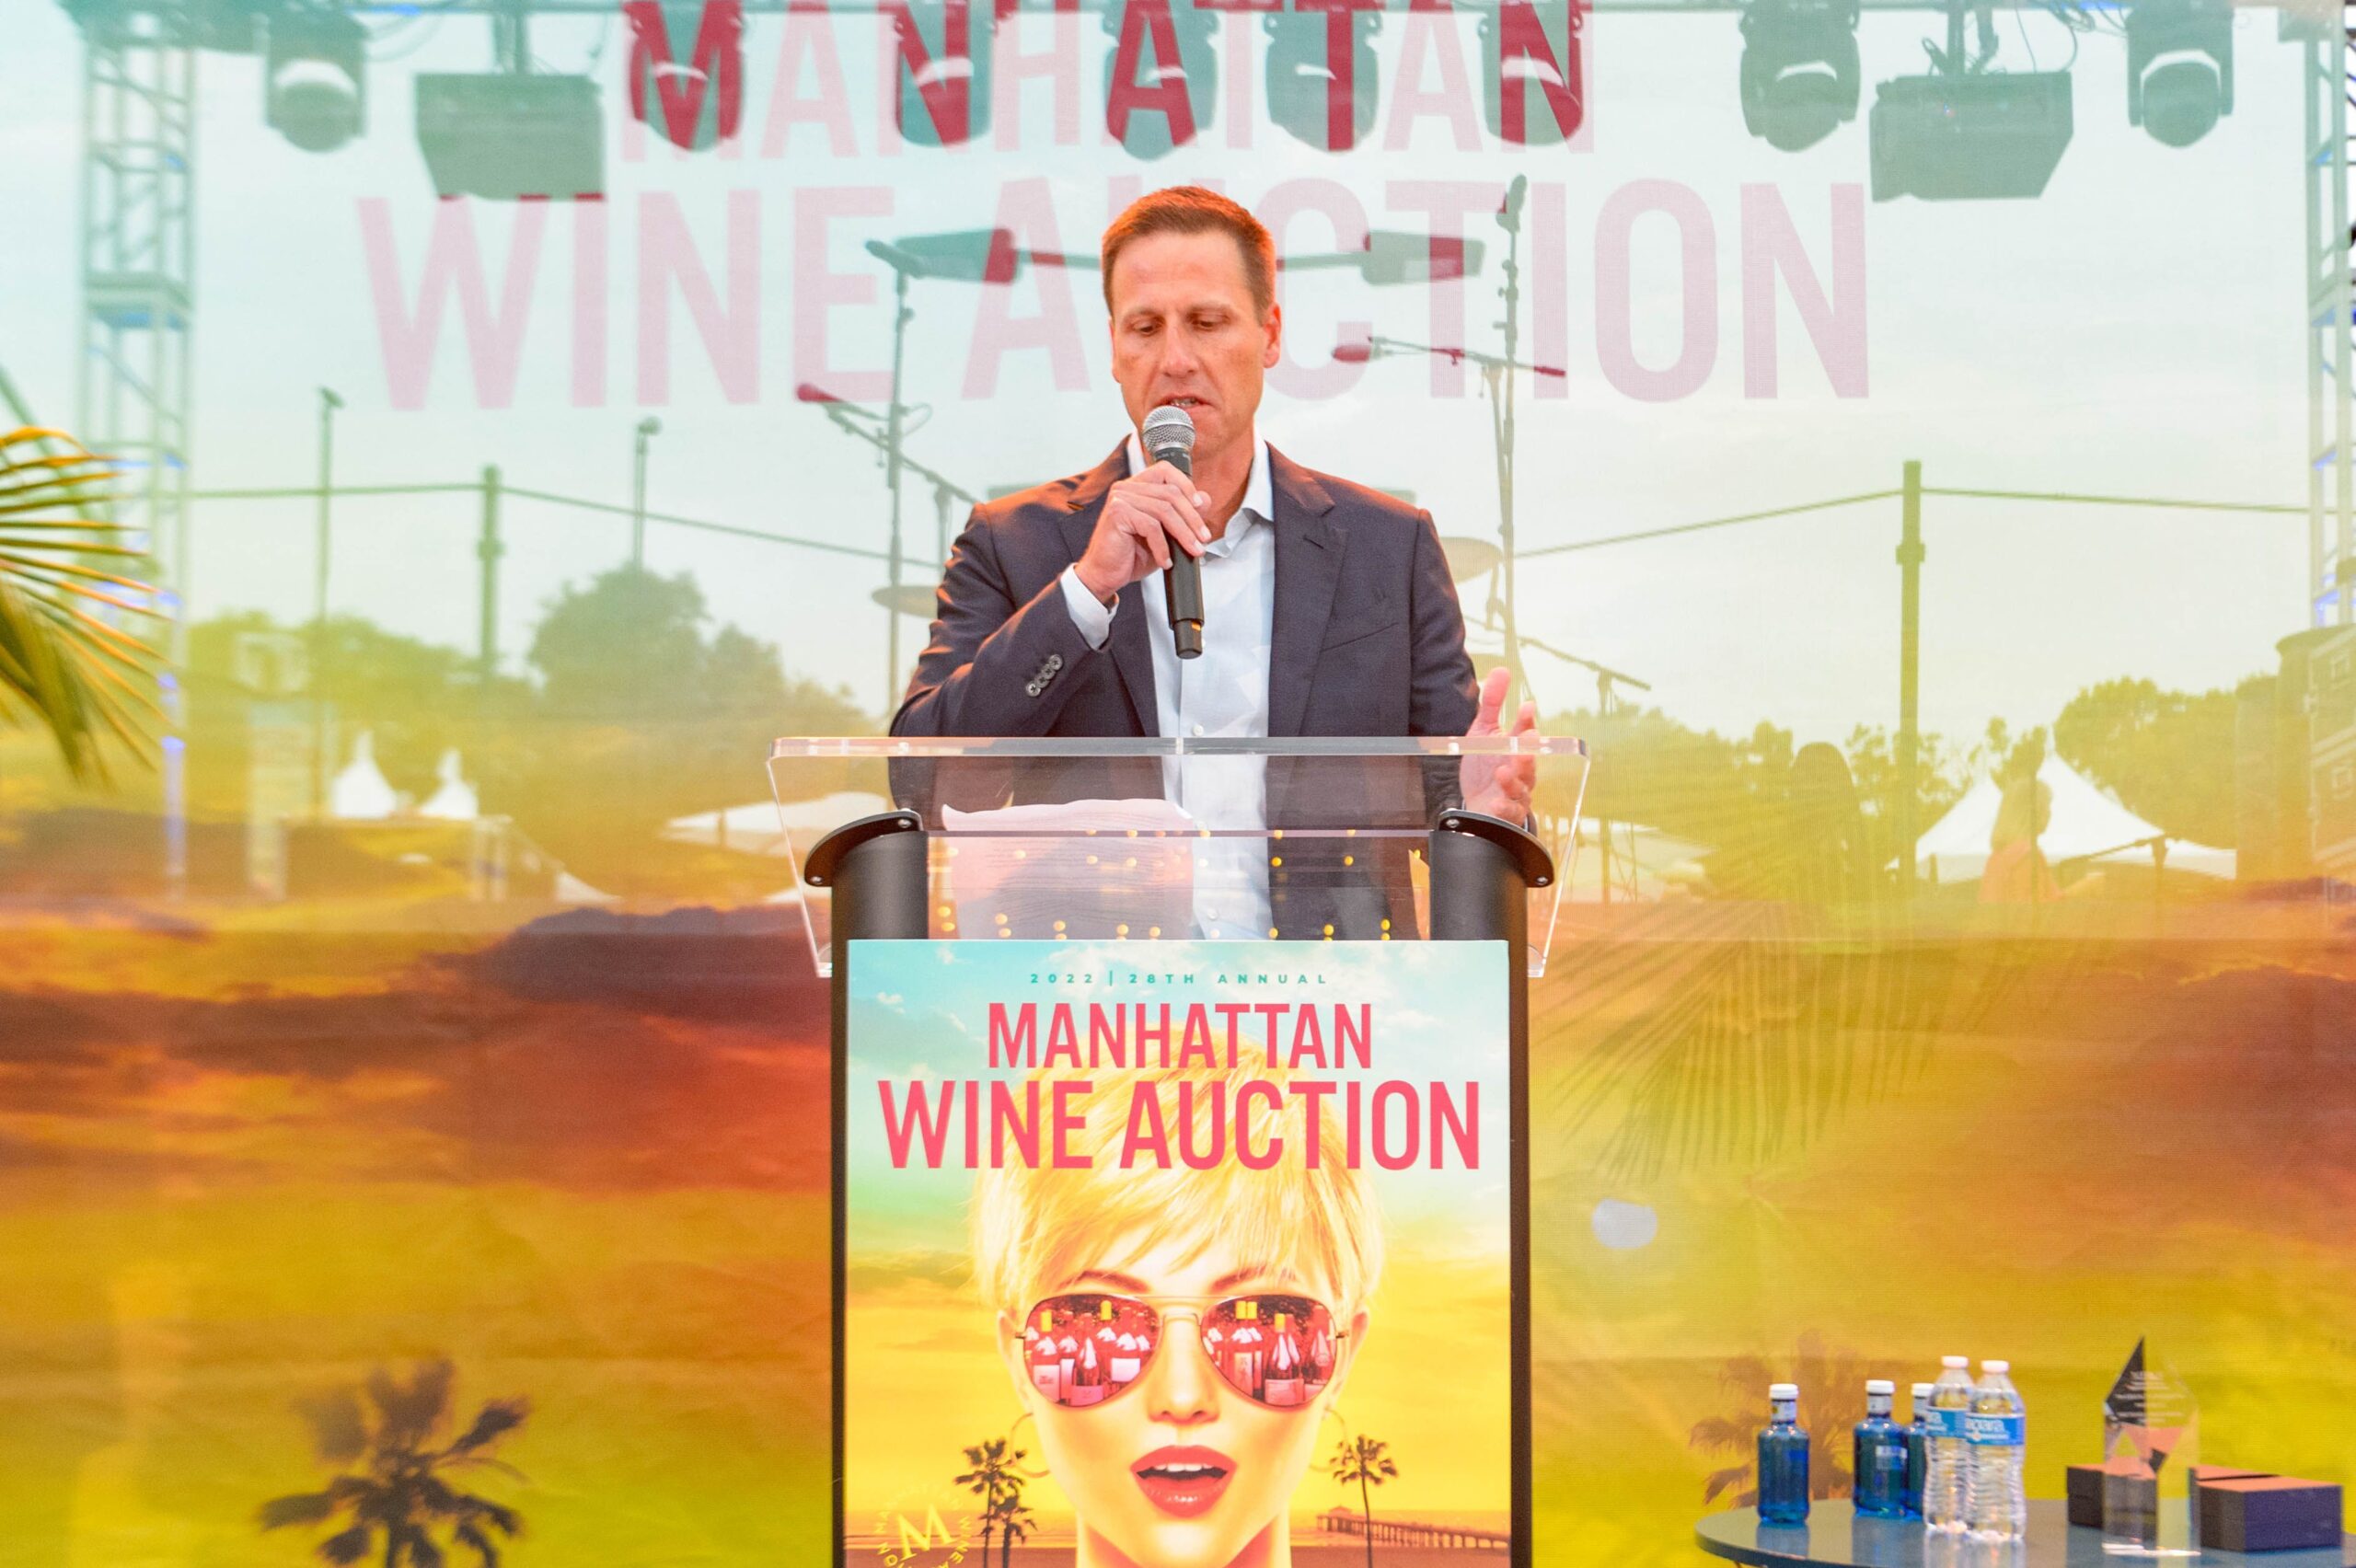 Manhattan Beach Wine Auction FoodWineCharity event on June 4th, 2022